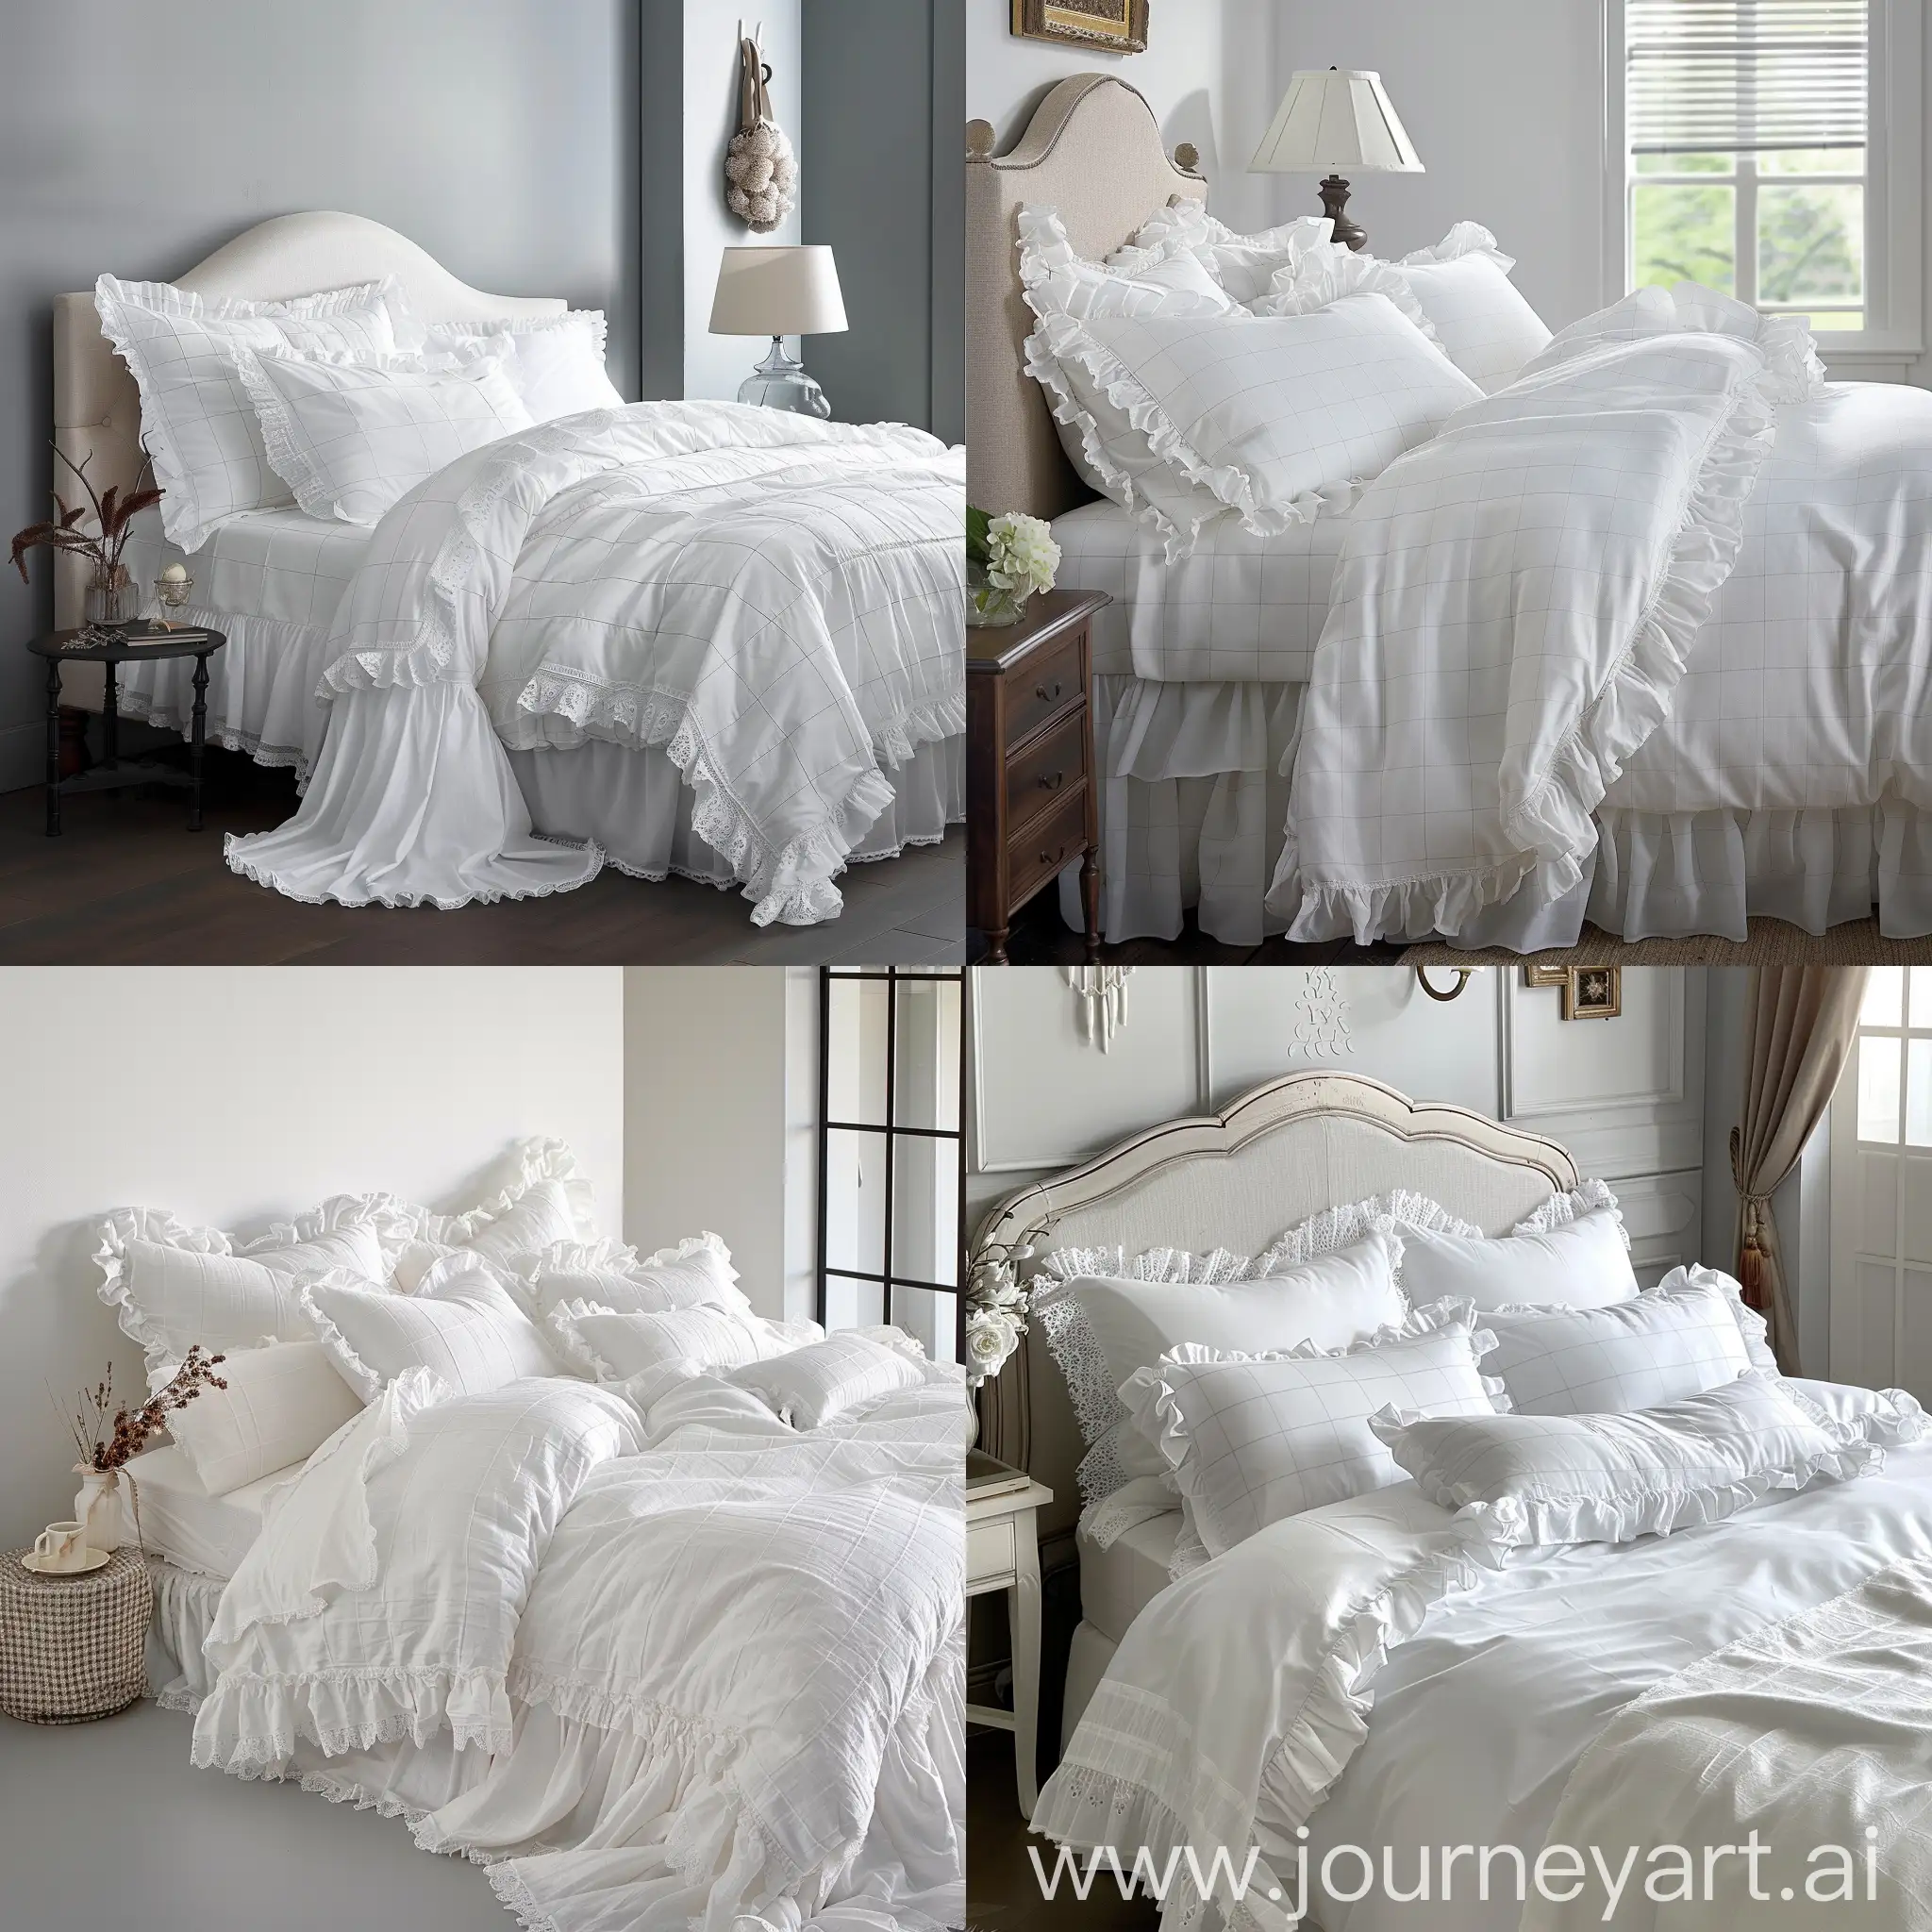 Ethereal-Romance-White-Bedding-Set-with-Lace-Detailing-and-Plaid-Design